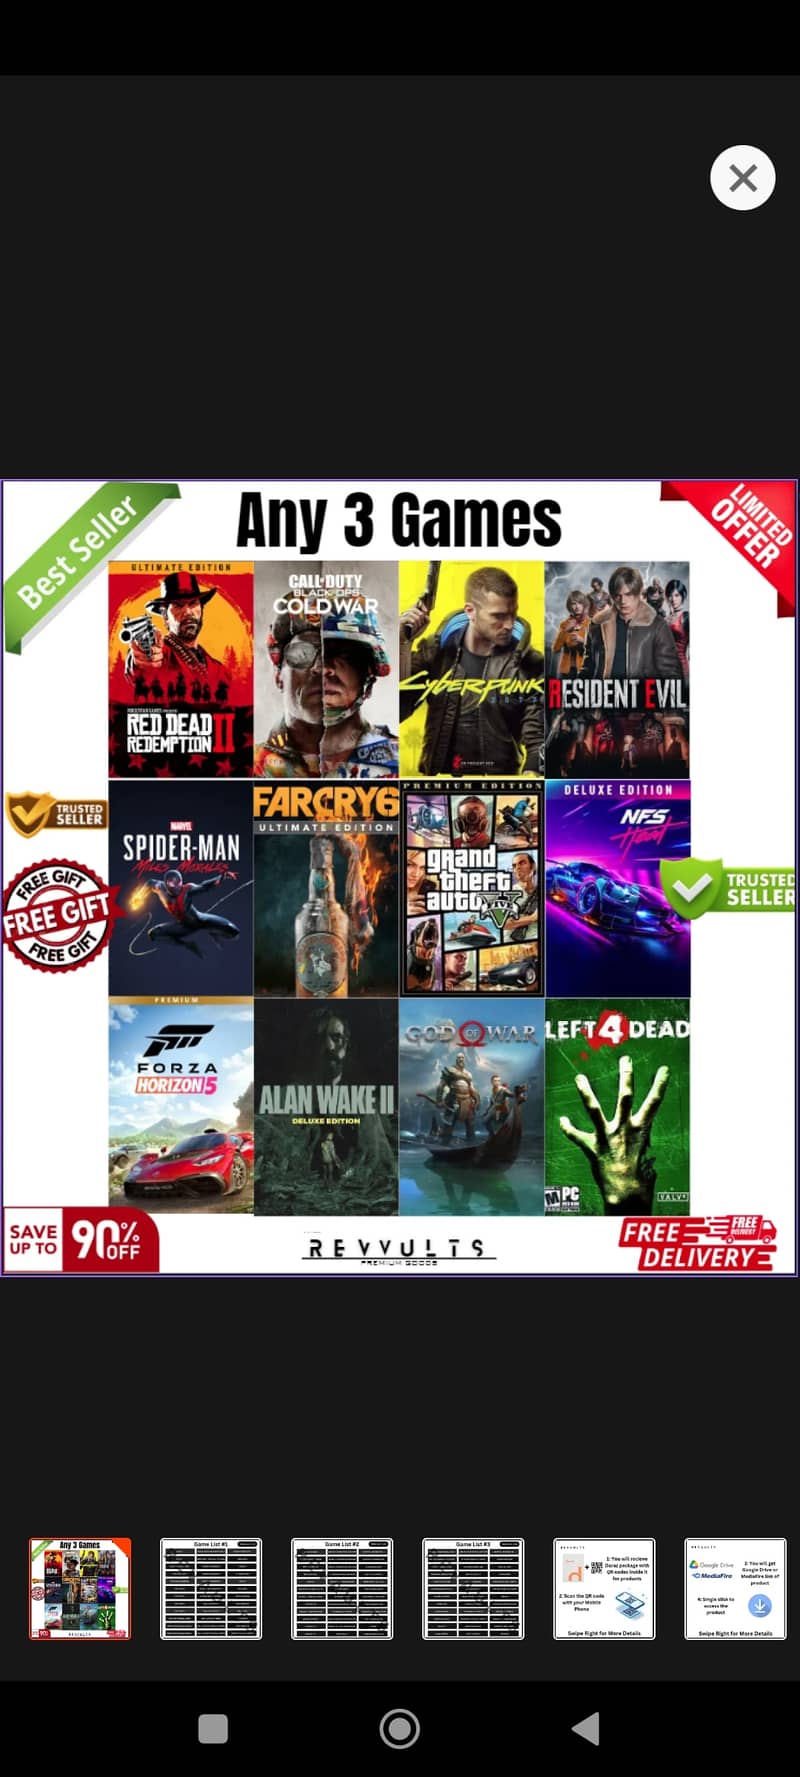 Any 3 Games Crack for low price 0